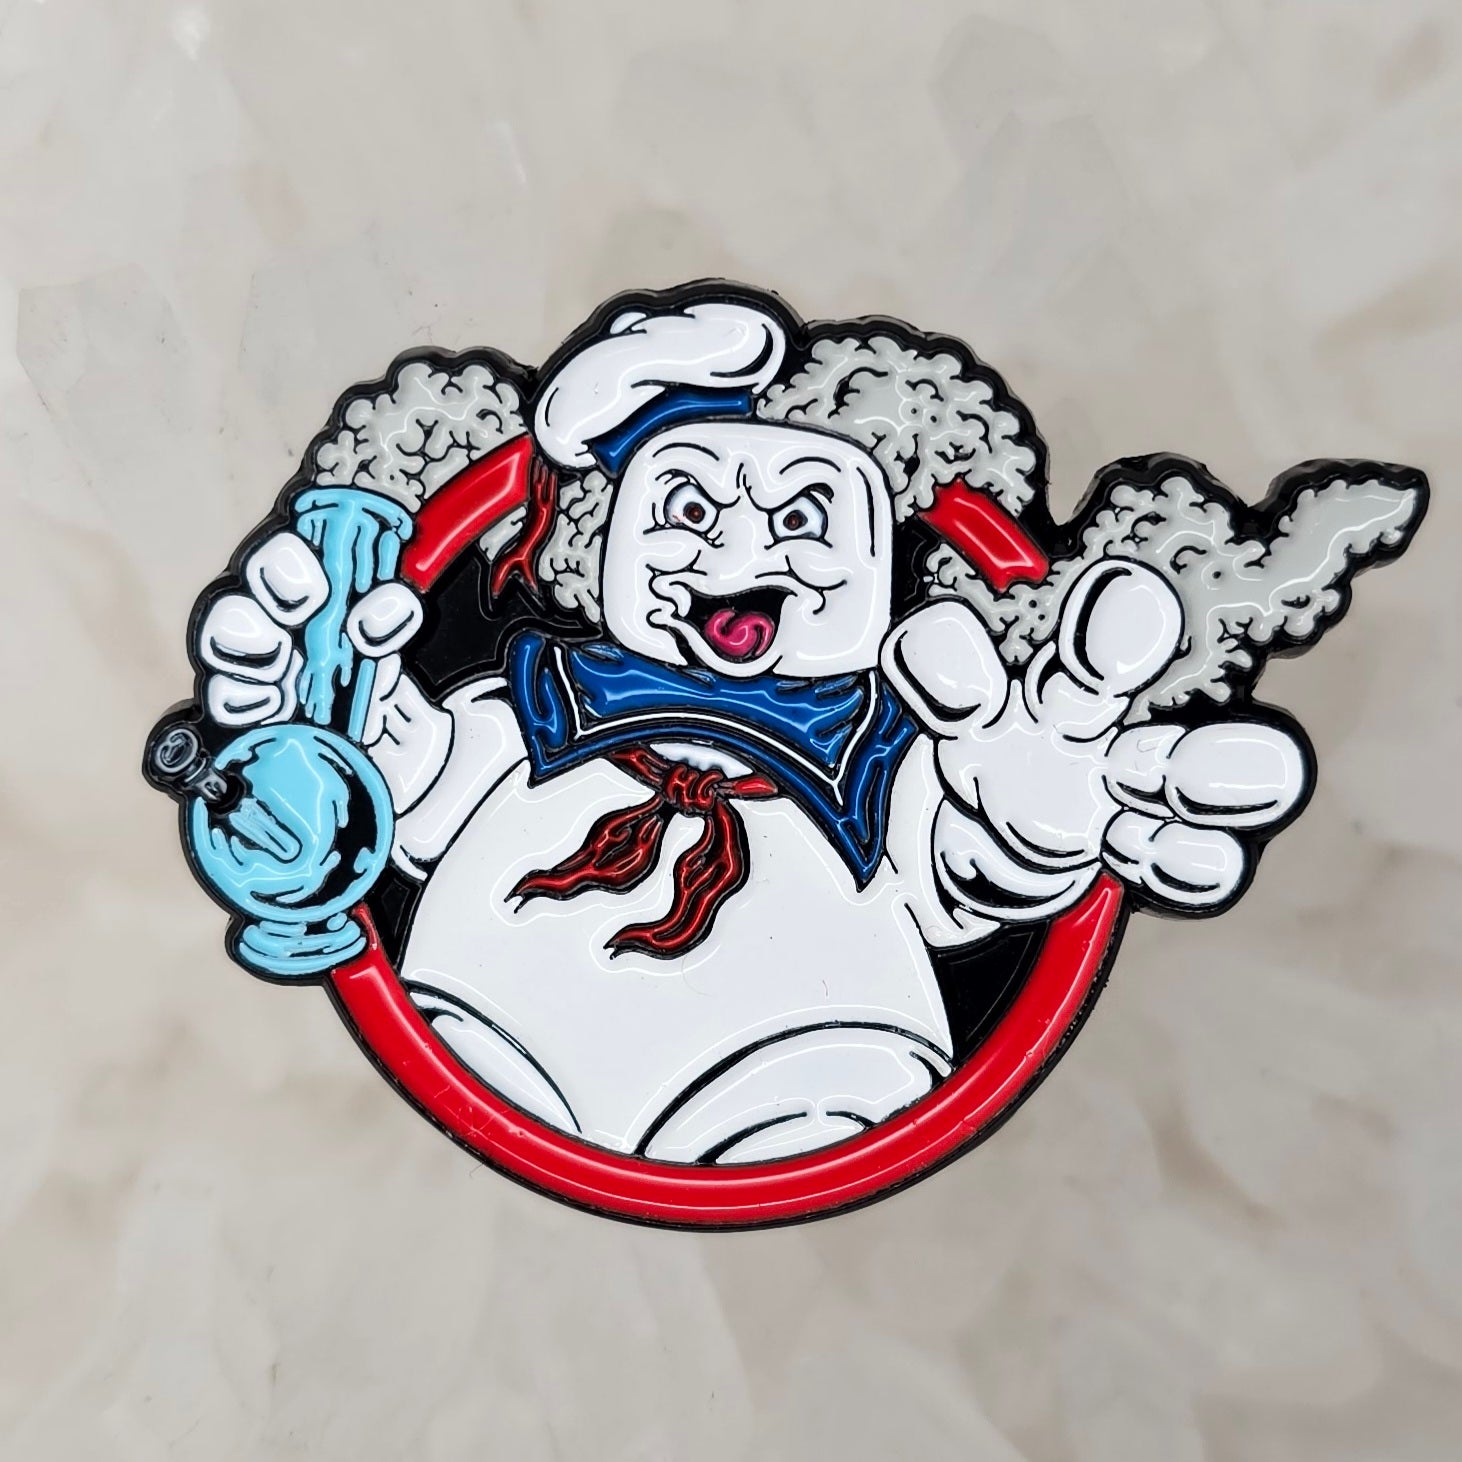 Stay Stoned Puft Ghost Weed Busters Parody Enamel Pins Hat Pins Lapel Pin Brooch Badge Festival Pin